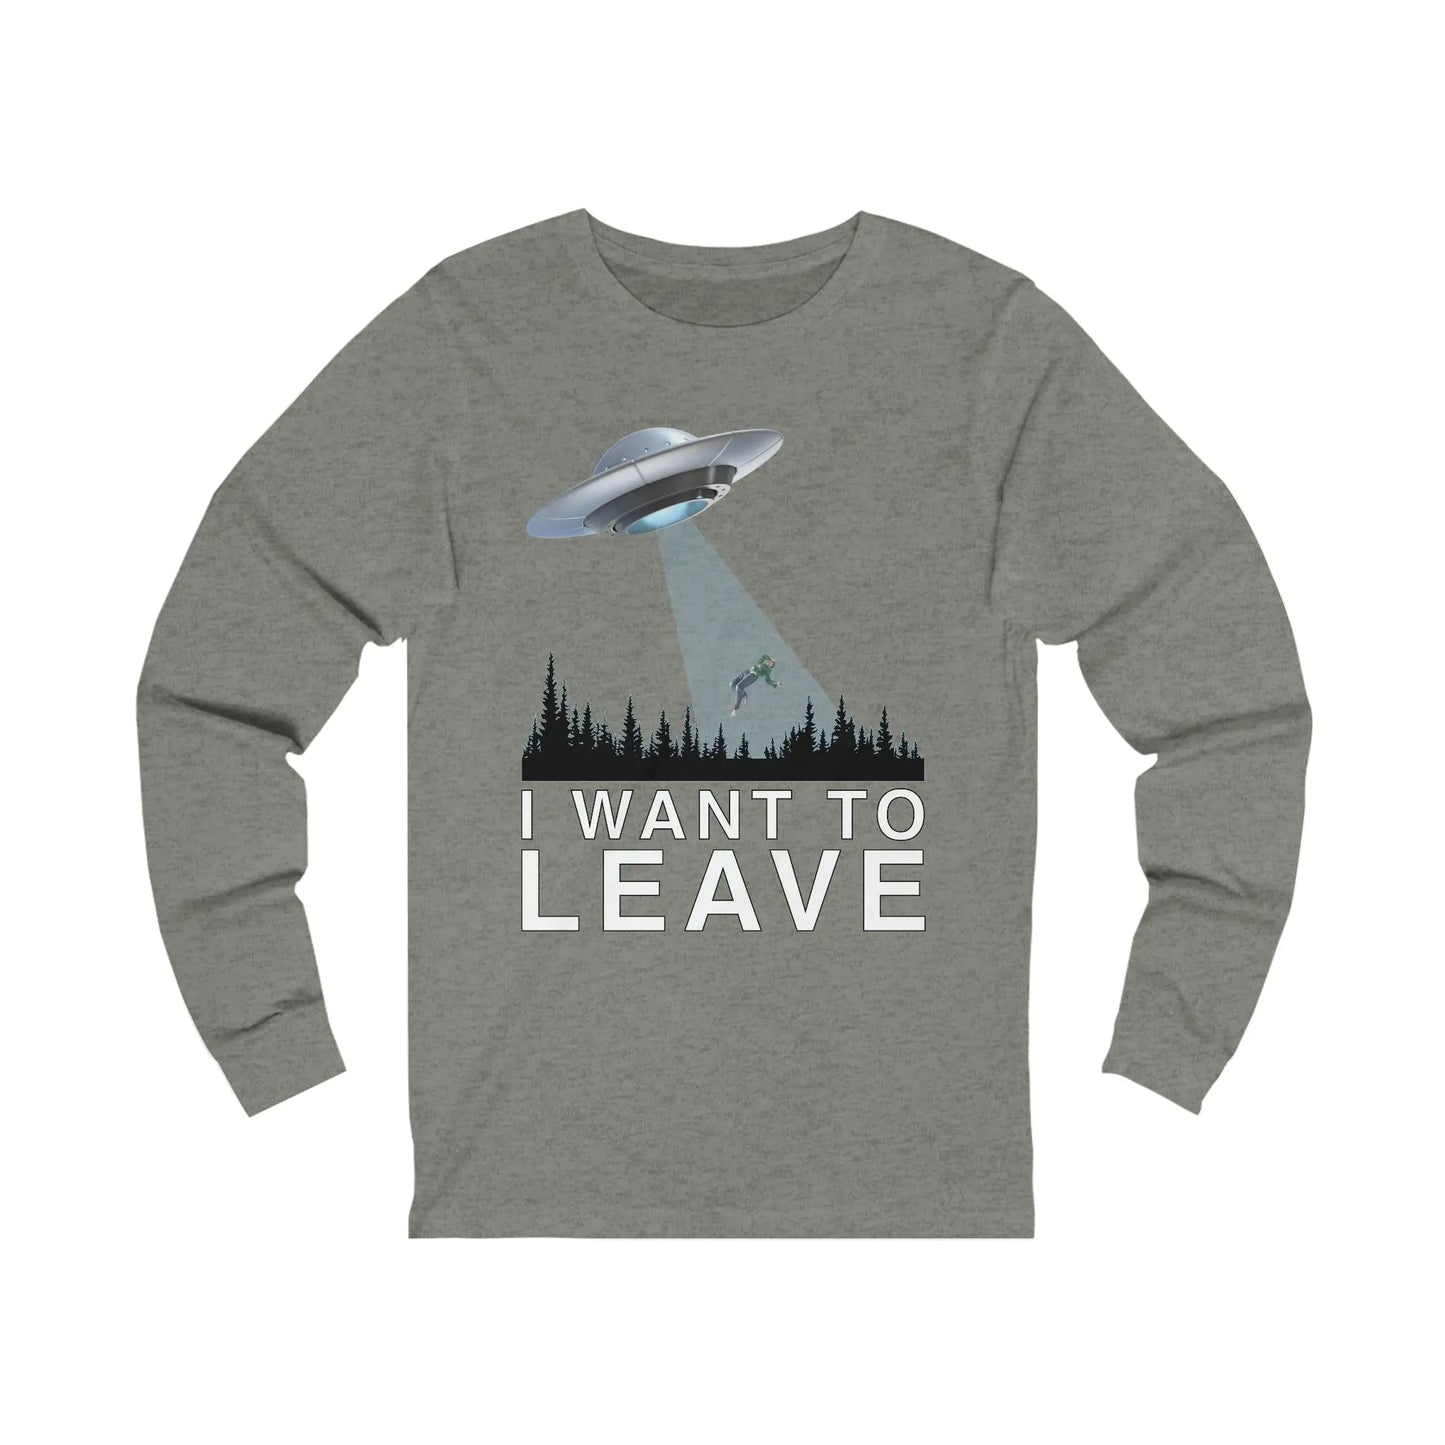 I Want To Leave Men's Long Sleeve Tee - Wicked Tees